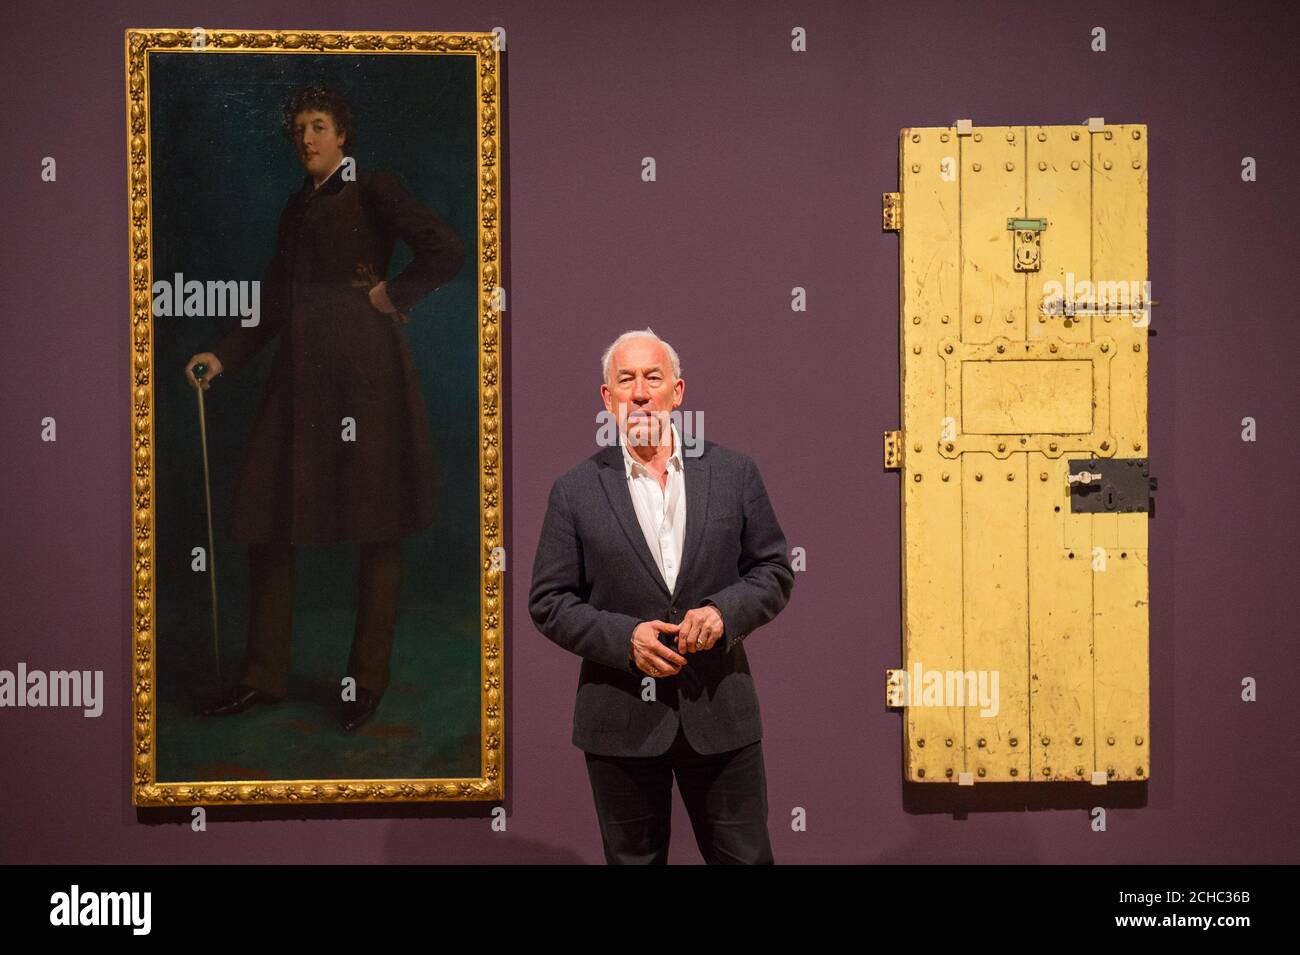 PABest Actor Simon Callow with 'Oscar Wilde' by Robert Goodloe Harper Pennington (left) and Oscar Wilde's prison door from Reading Gaol, during a photo call at the Tate Britain in London for their Queer British Art 1861 -1967 exhibition. Stock Photo